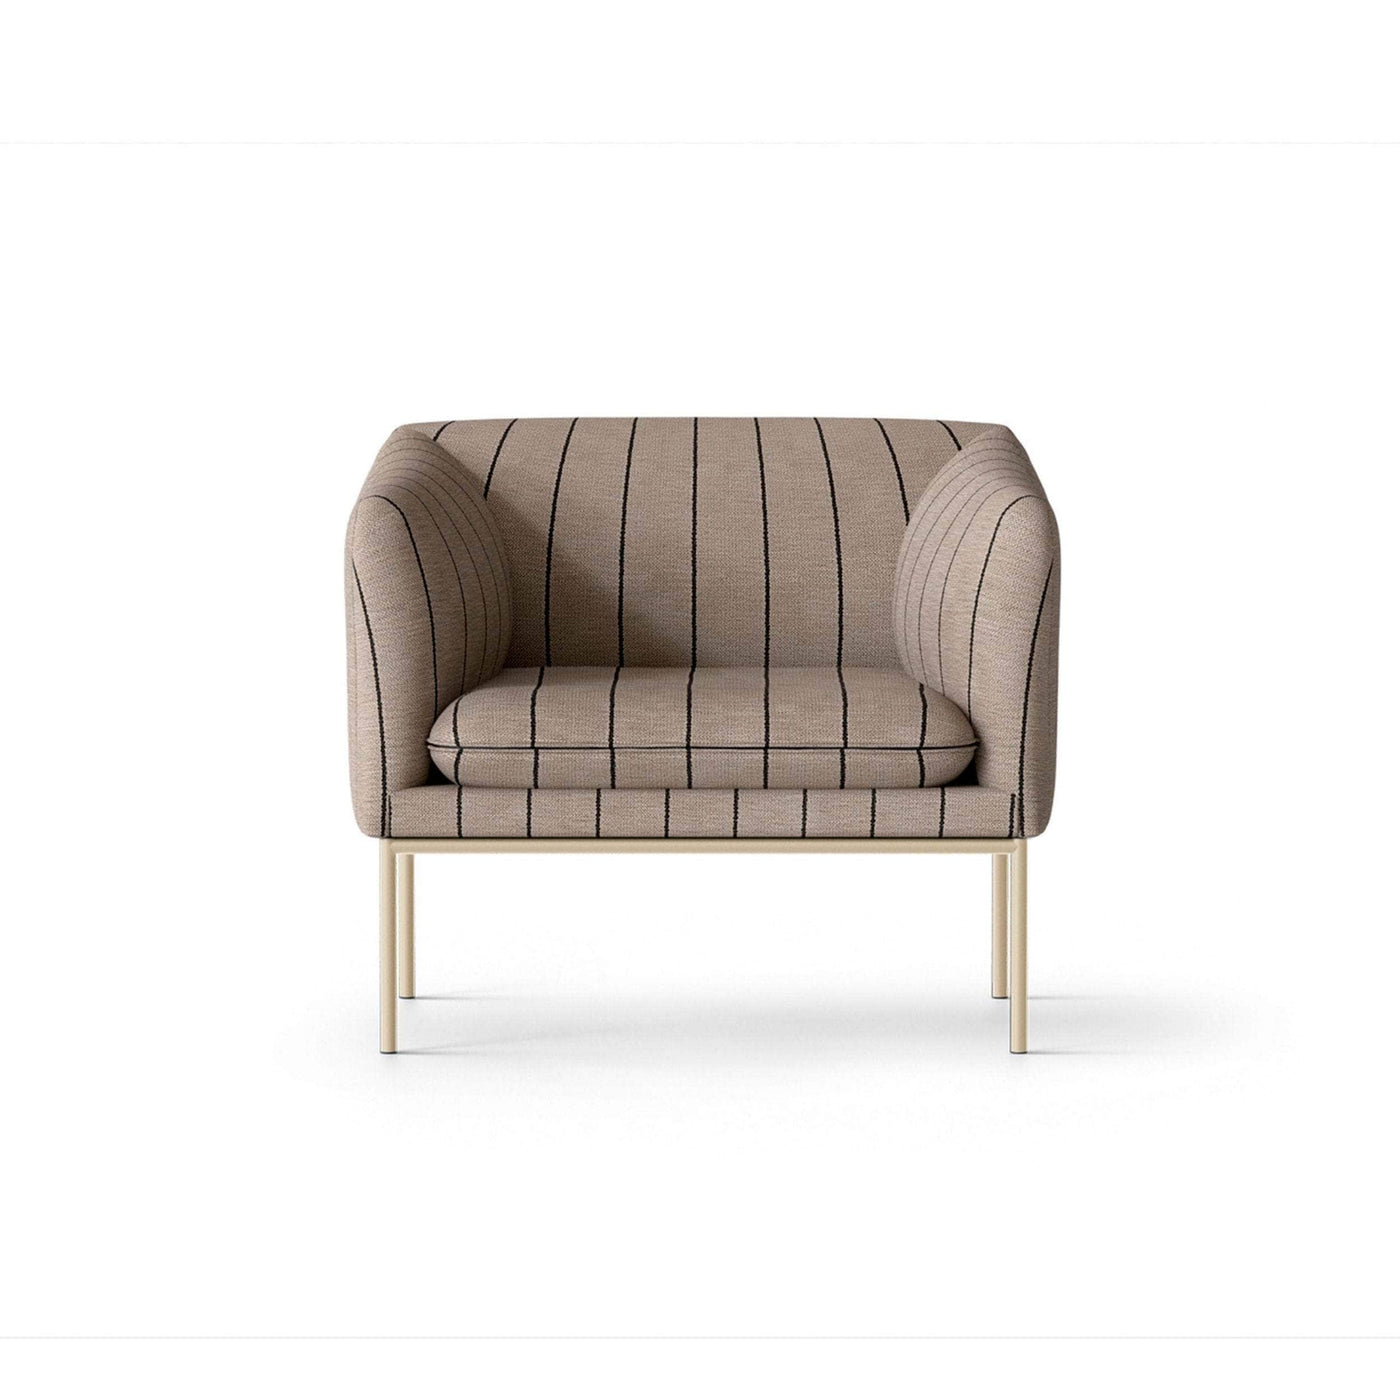 ferm LIVING Turn 1 seater with cashmere frame. Shop online at someday designs. #colour_pasadena